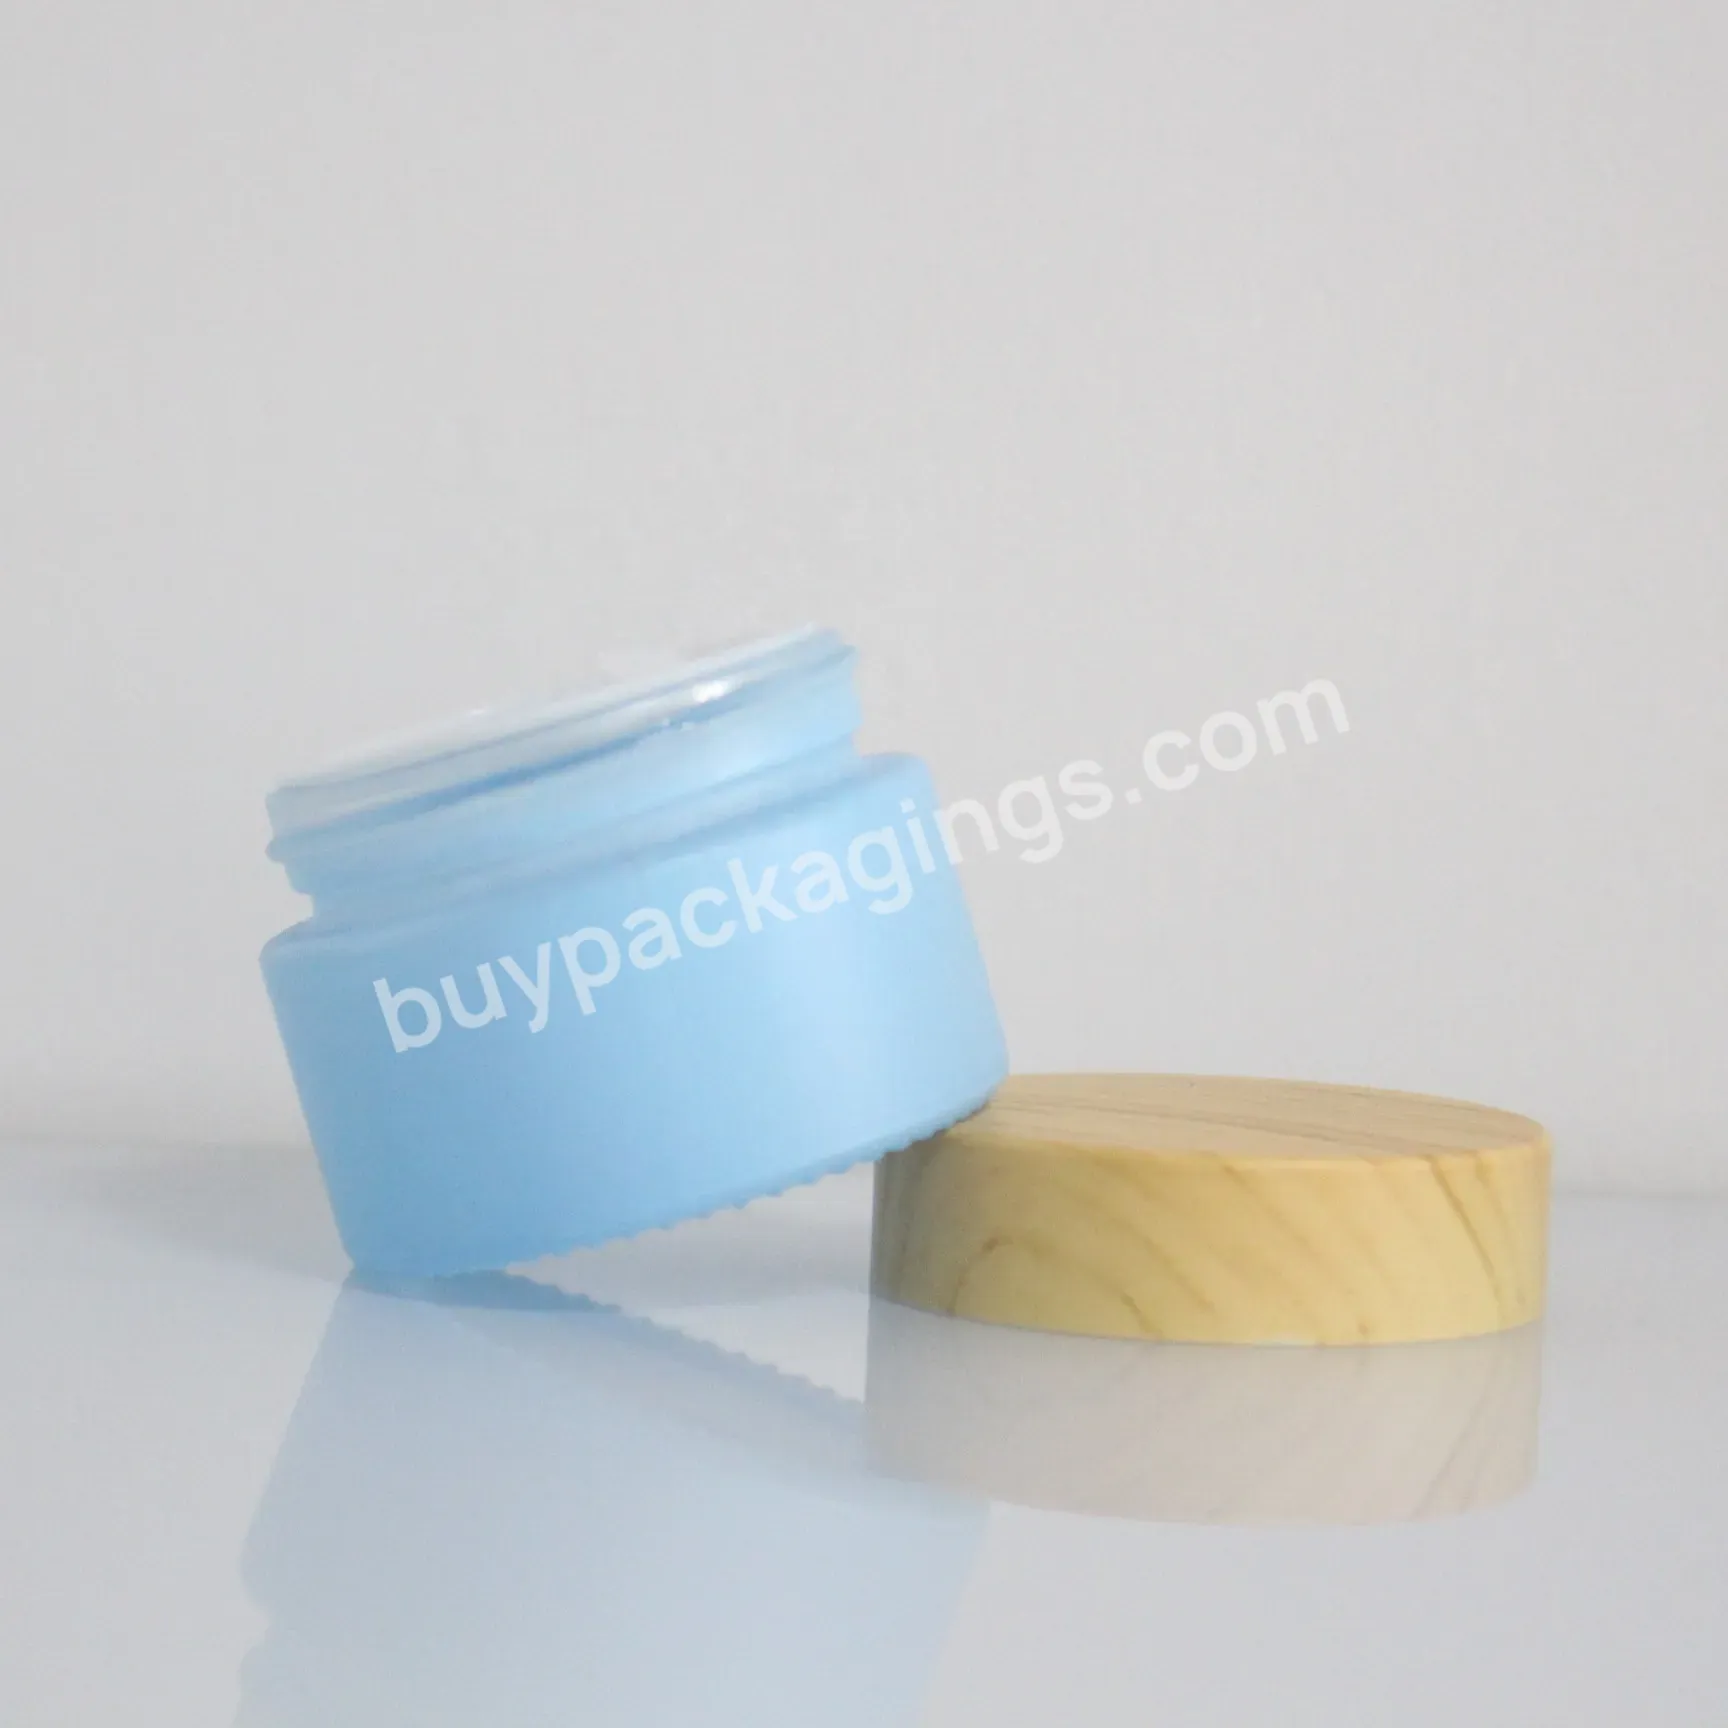 Wholesale Glass Jar Containers Bamboo Cream Jar Frosted Glass Jar With Bamboo Wooden Lid - Buy Bamboo Glass Jar,Glass Jar With Bamboo Lid,Glass Jars With Bamboo Wooden Lids.